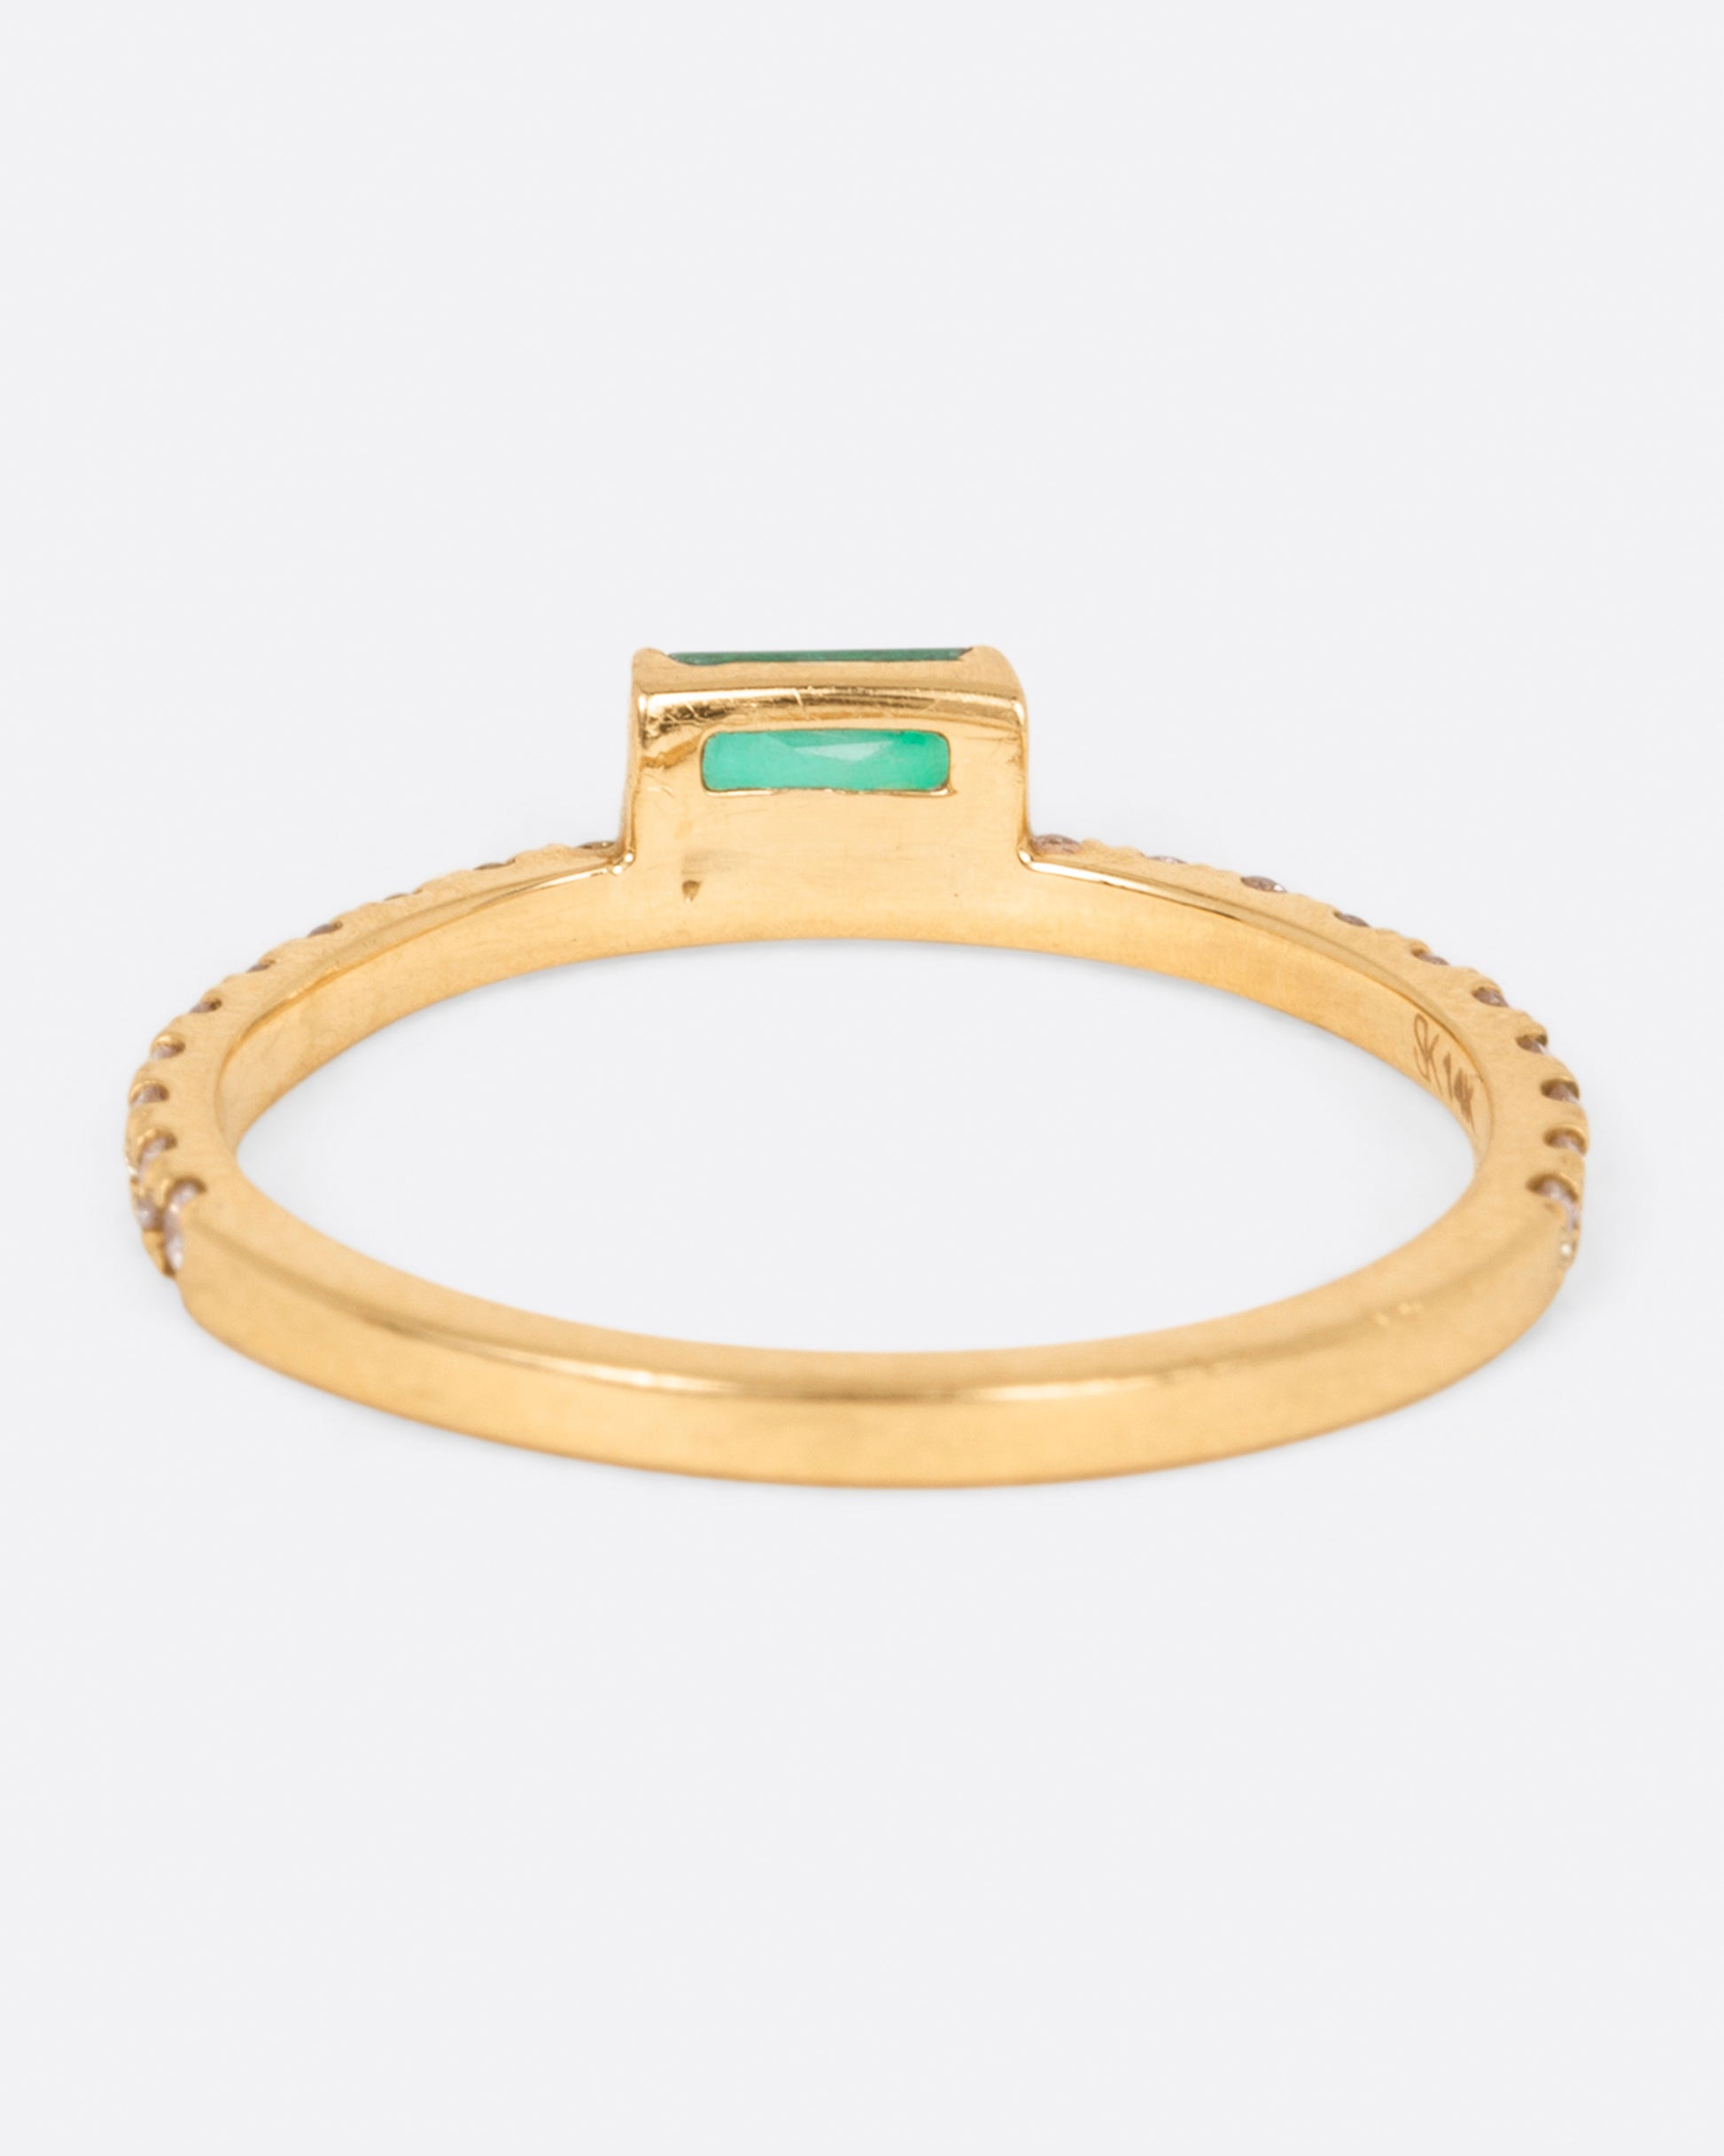 A yellow gold ring with white diamonds going 2/3 of the way around and an emerald baguette sitting atop it, shown from the back.